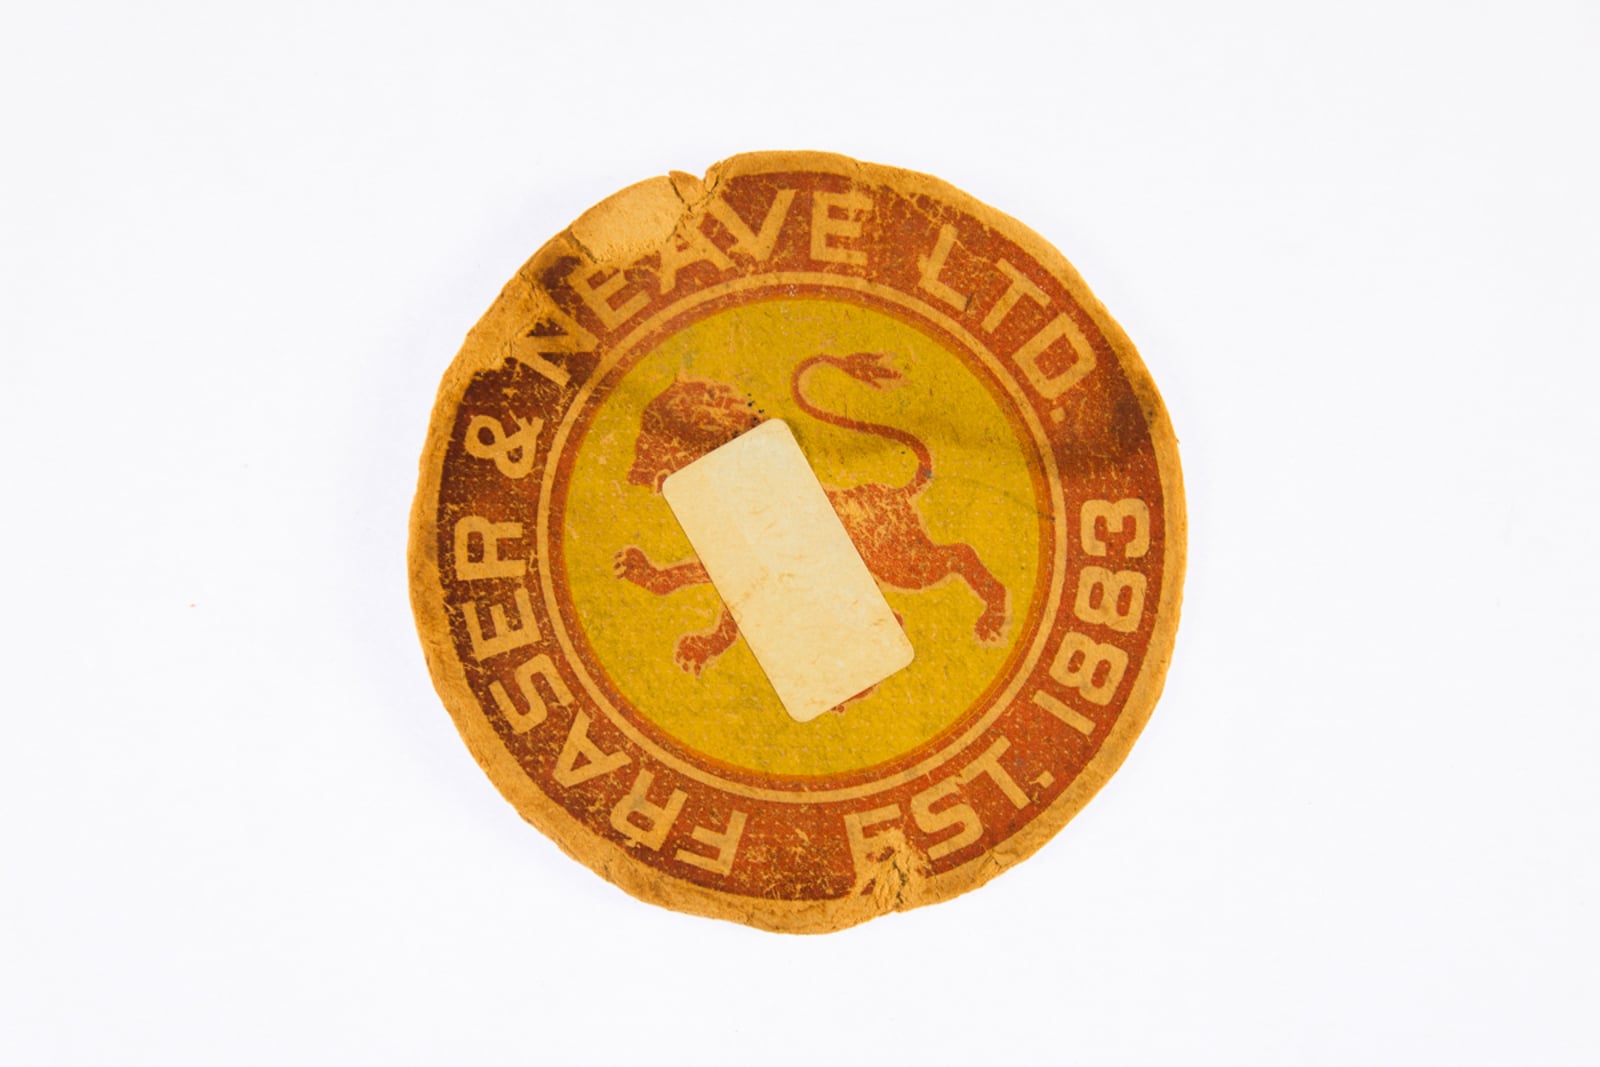 "Tiger Beer For All And All For" Fraser & Neave Circular Vintage Coaster